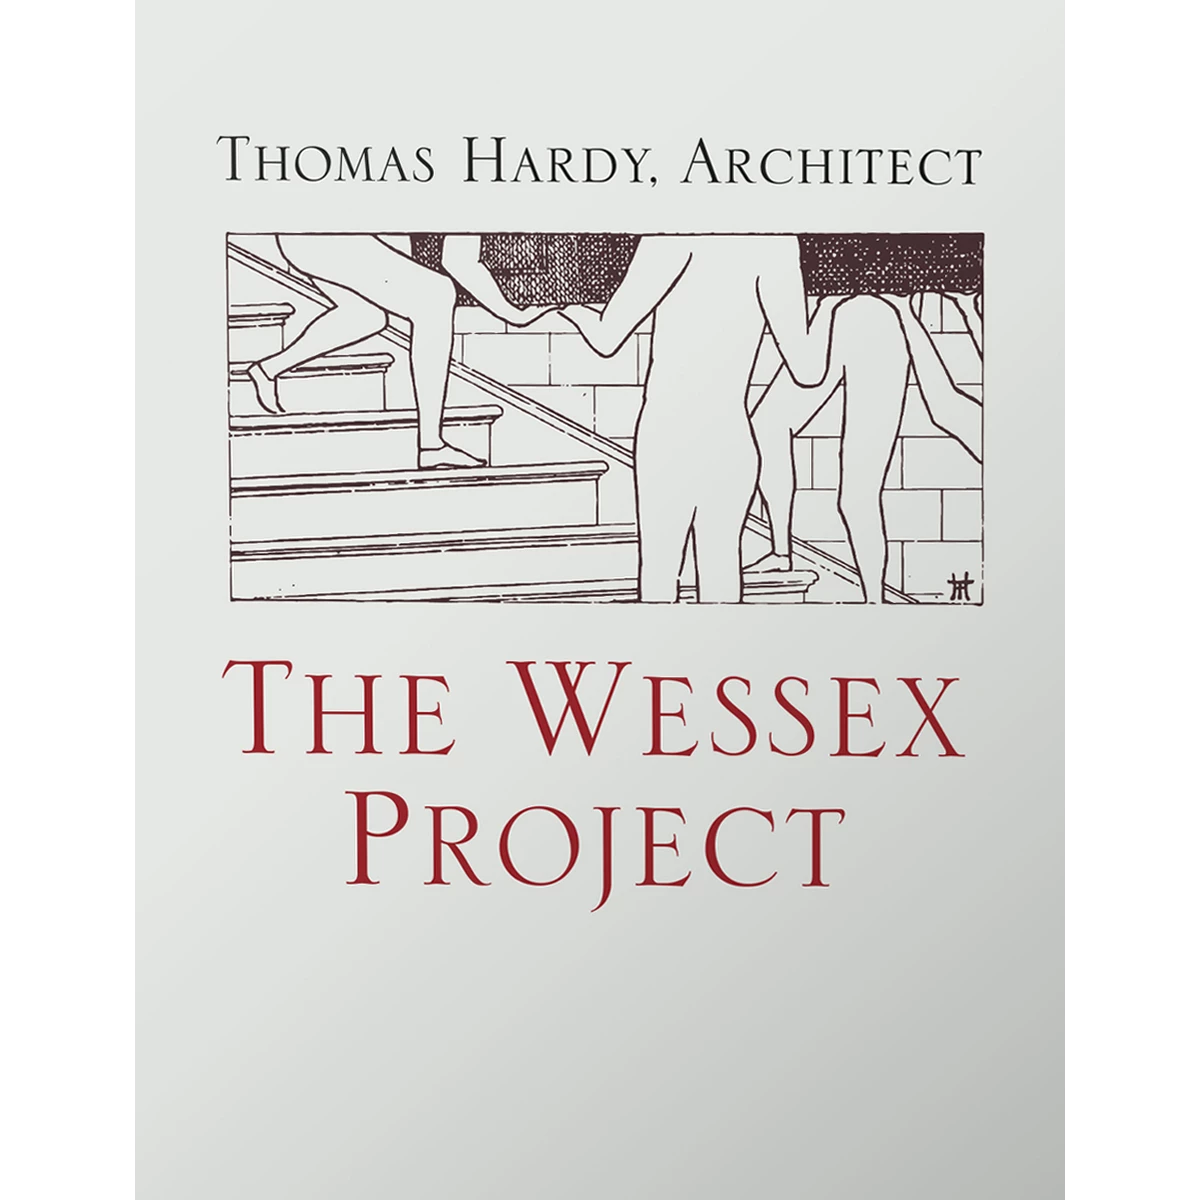 The Wessex Project. Thomas Hardy, Architect